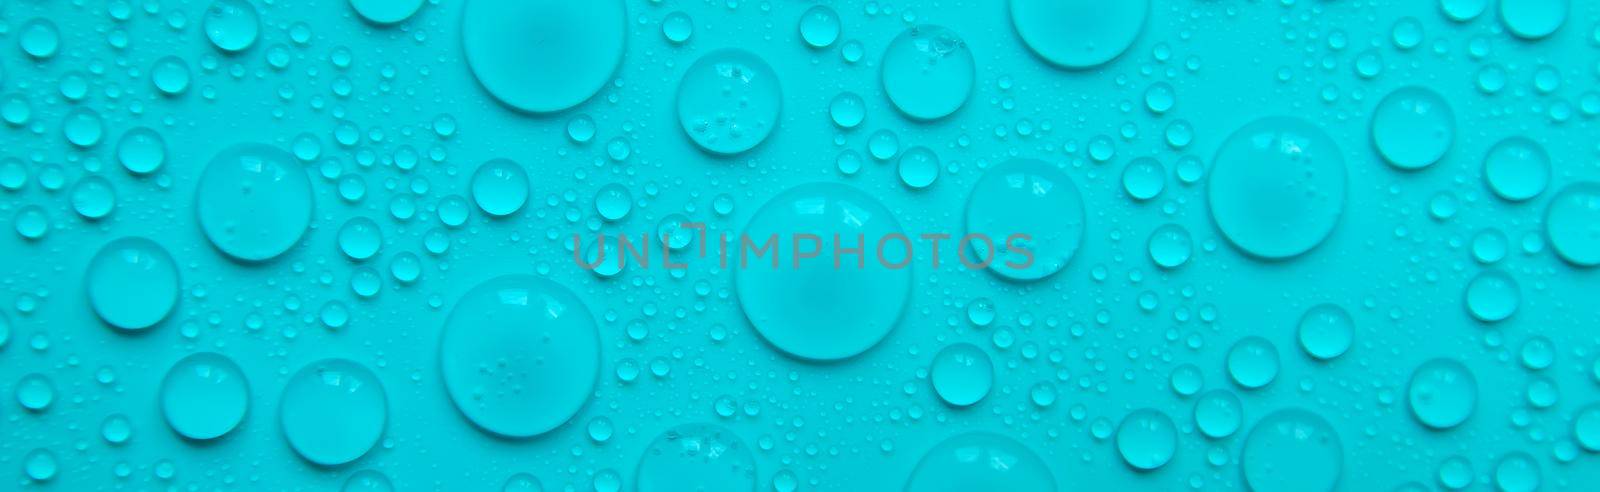 Drops of liquid, moisturizing cosmetic product. Hyaluronic acid. Selective focus. Nature.